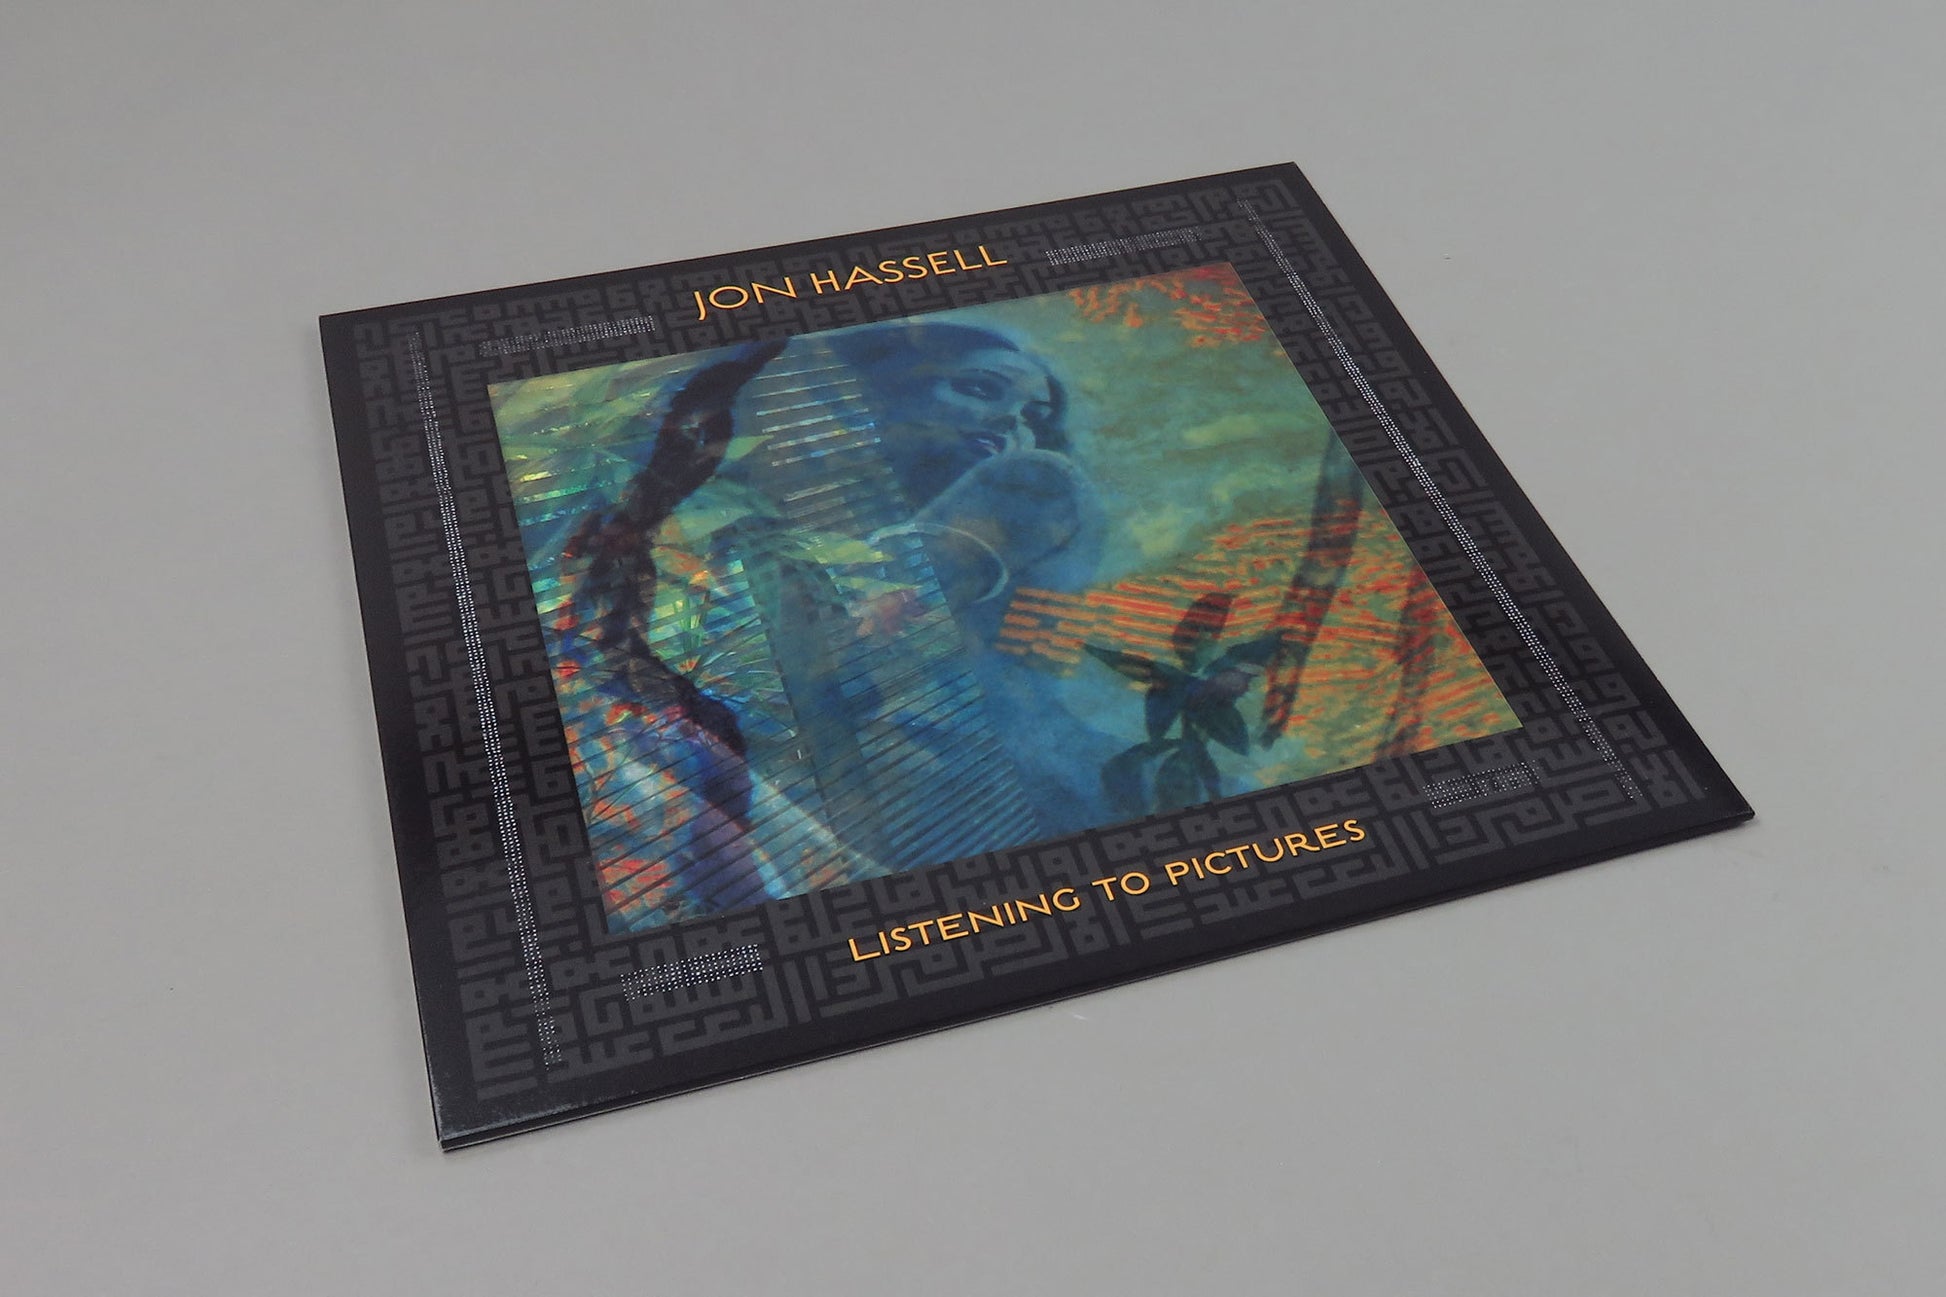 Jon Hassell - Listening To Pictures (Pentimento Volume One) Vinil - Salvaje Music Store MEXICO